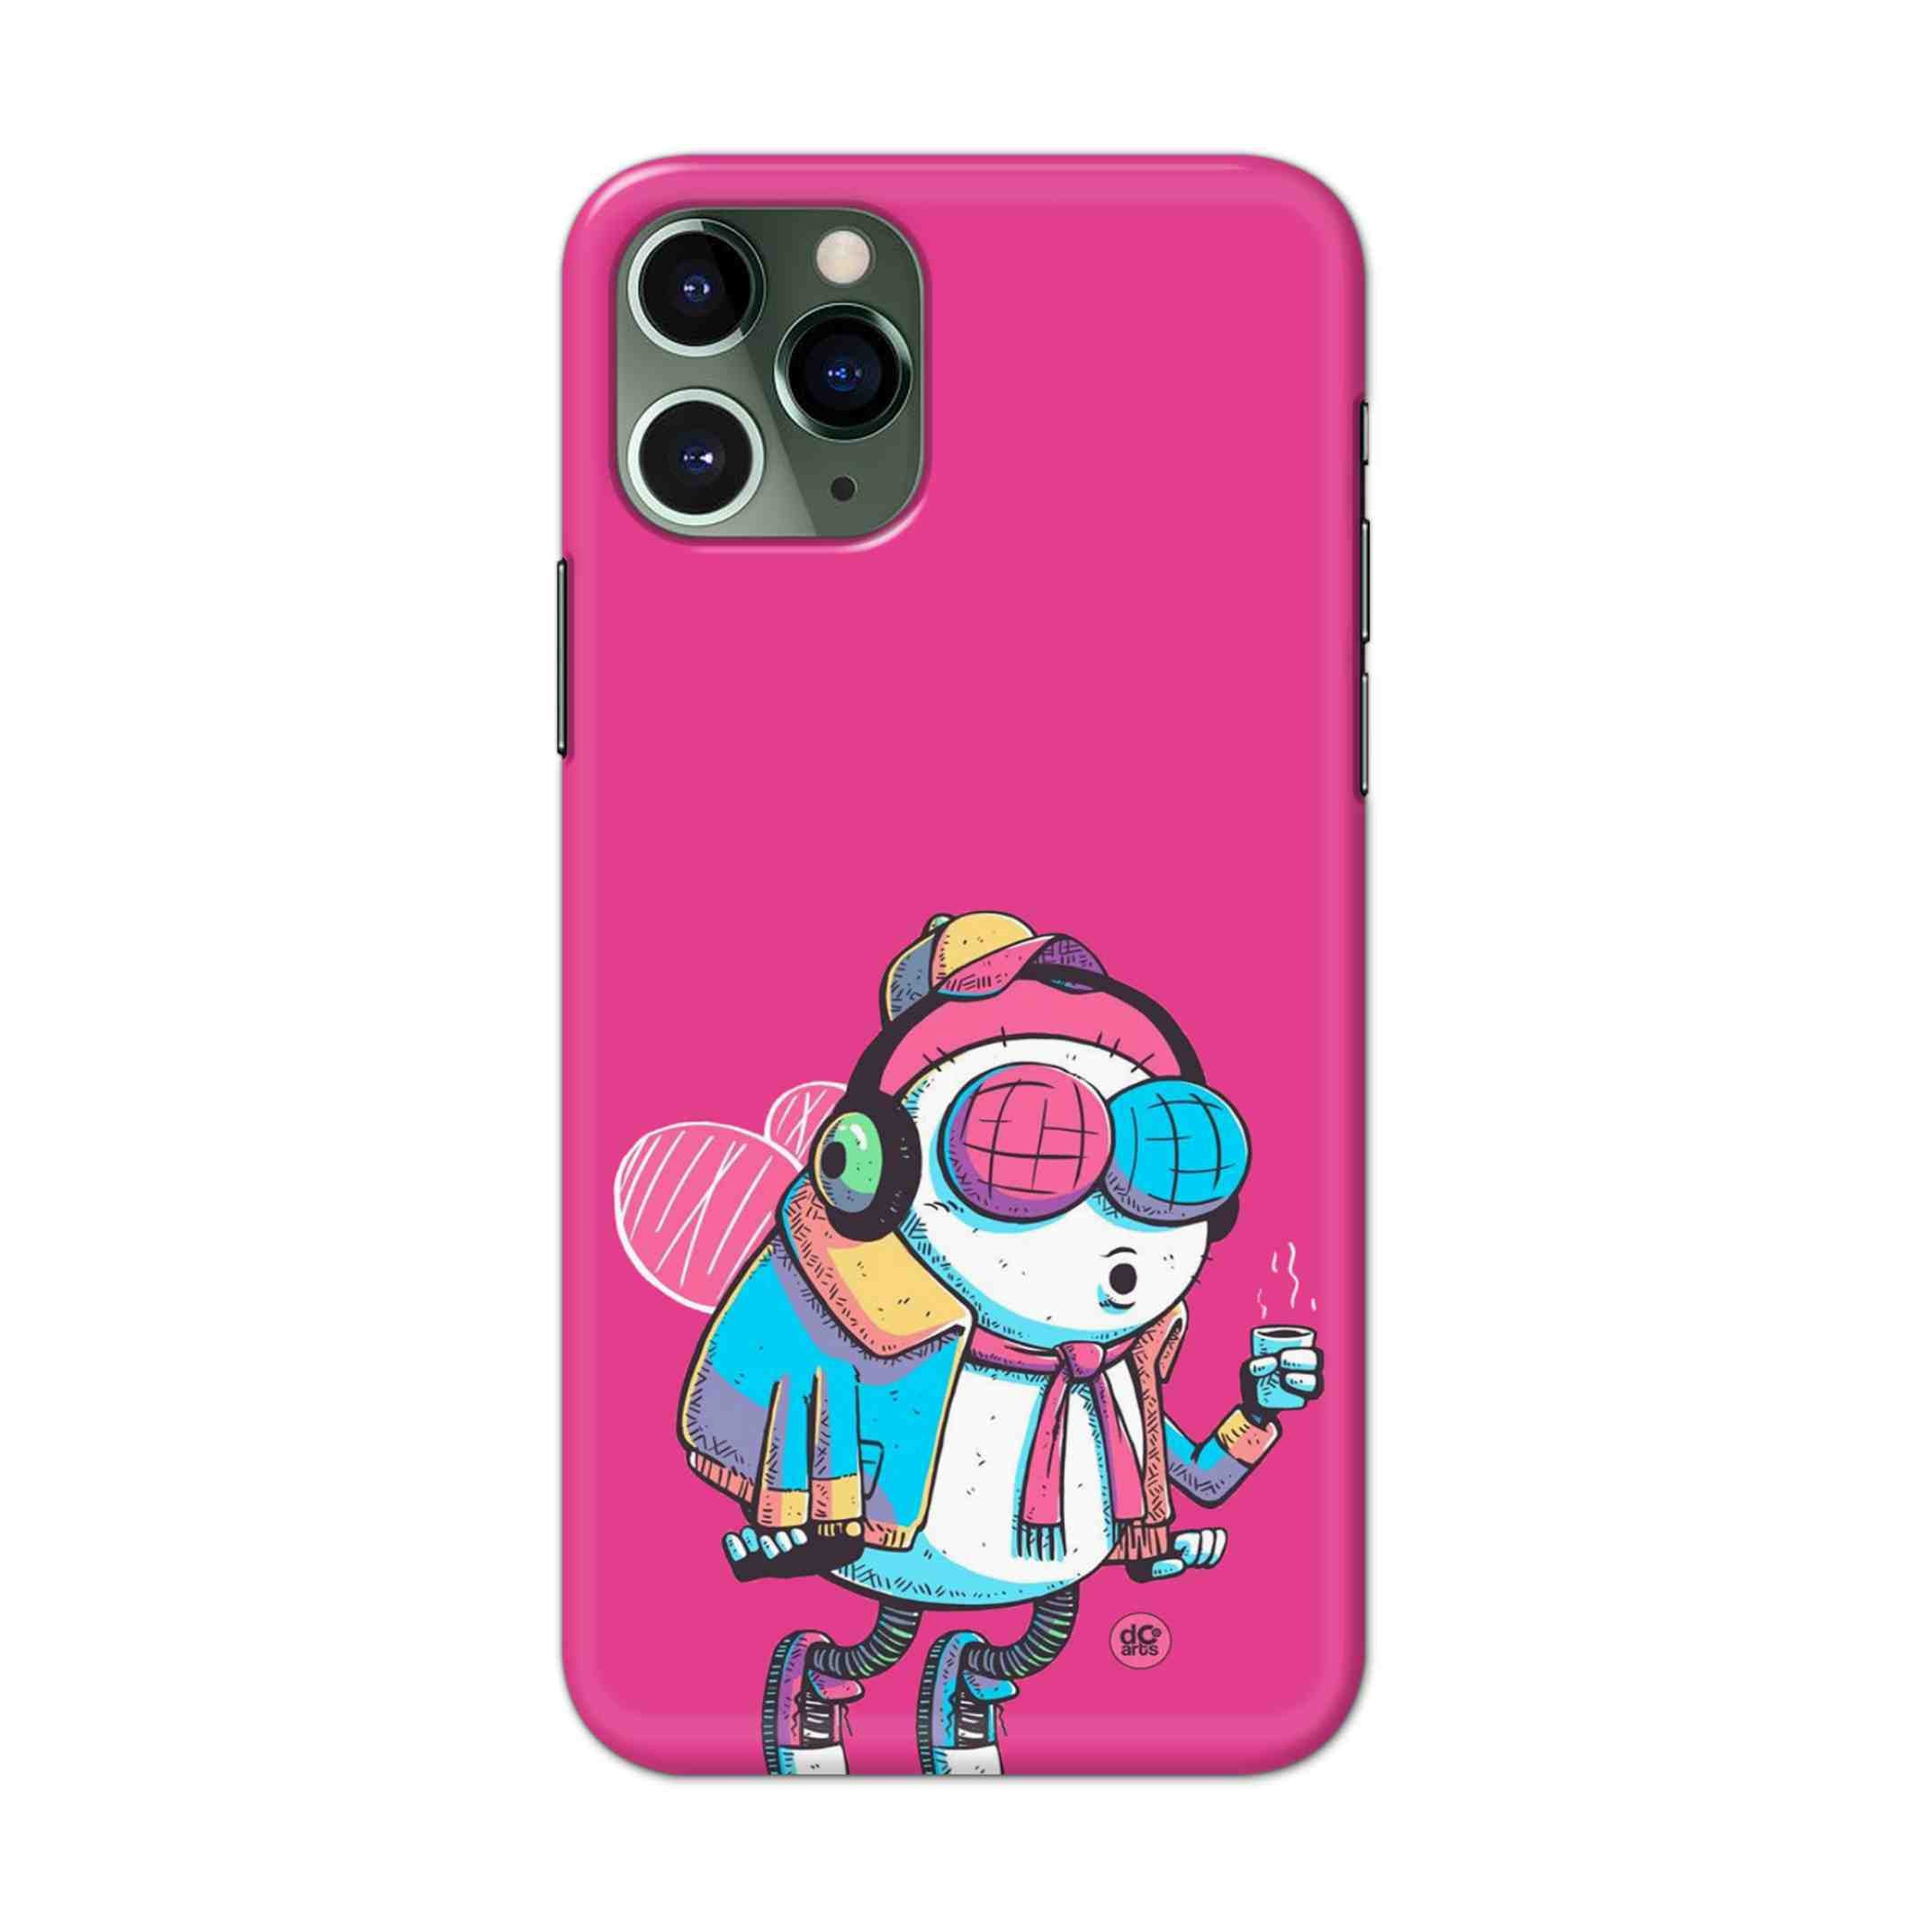 Buy Skyfly Hard Back Mobile Phone Case/Cover For iPhone 11 Pro Online